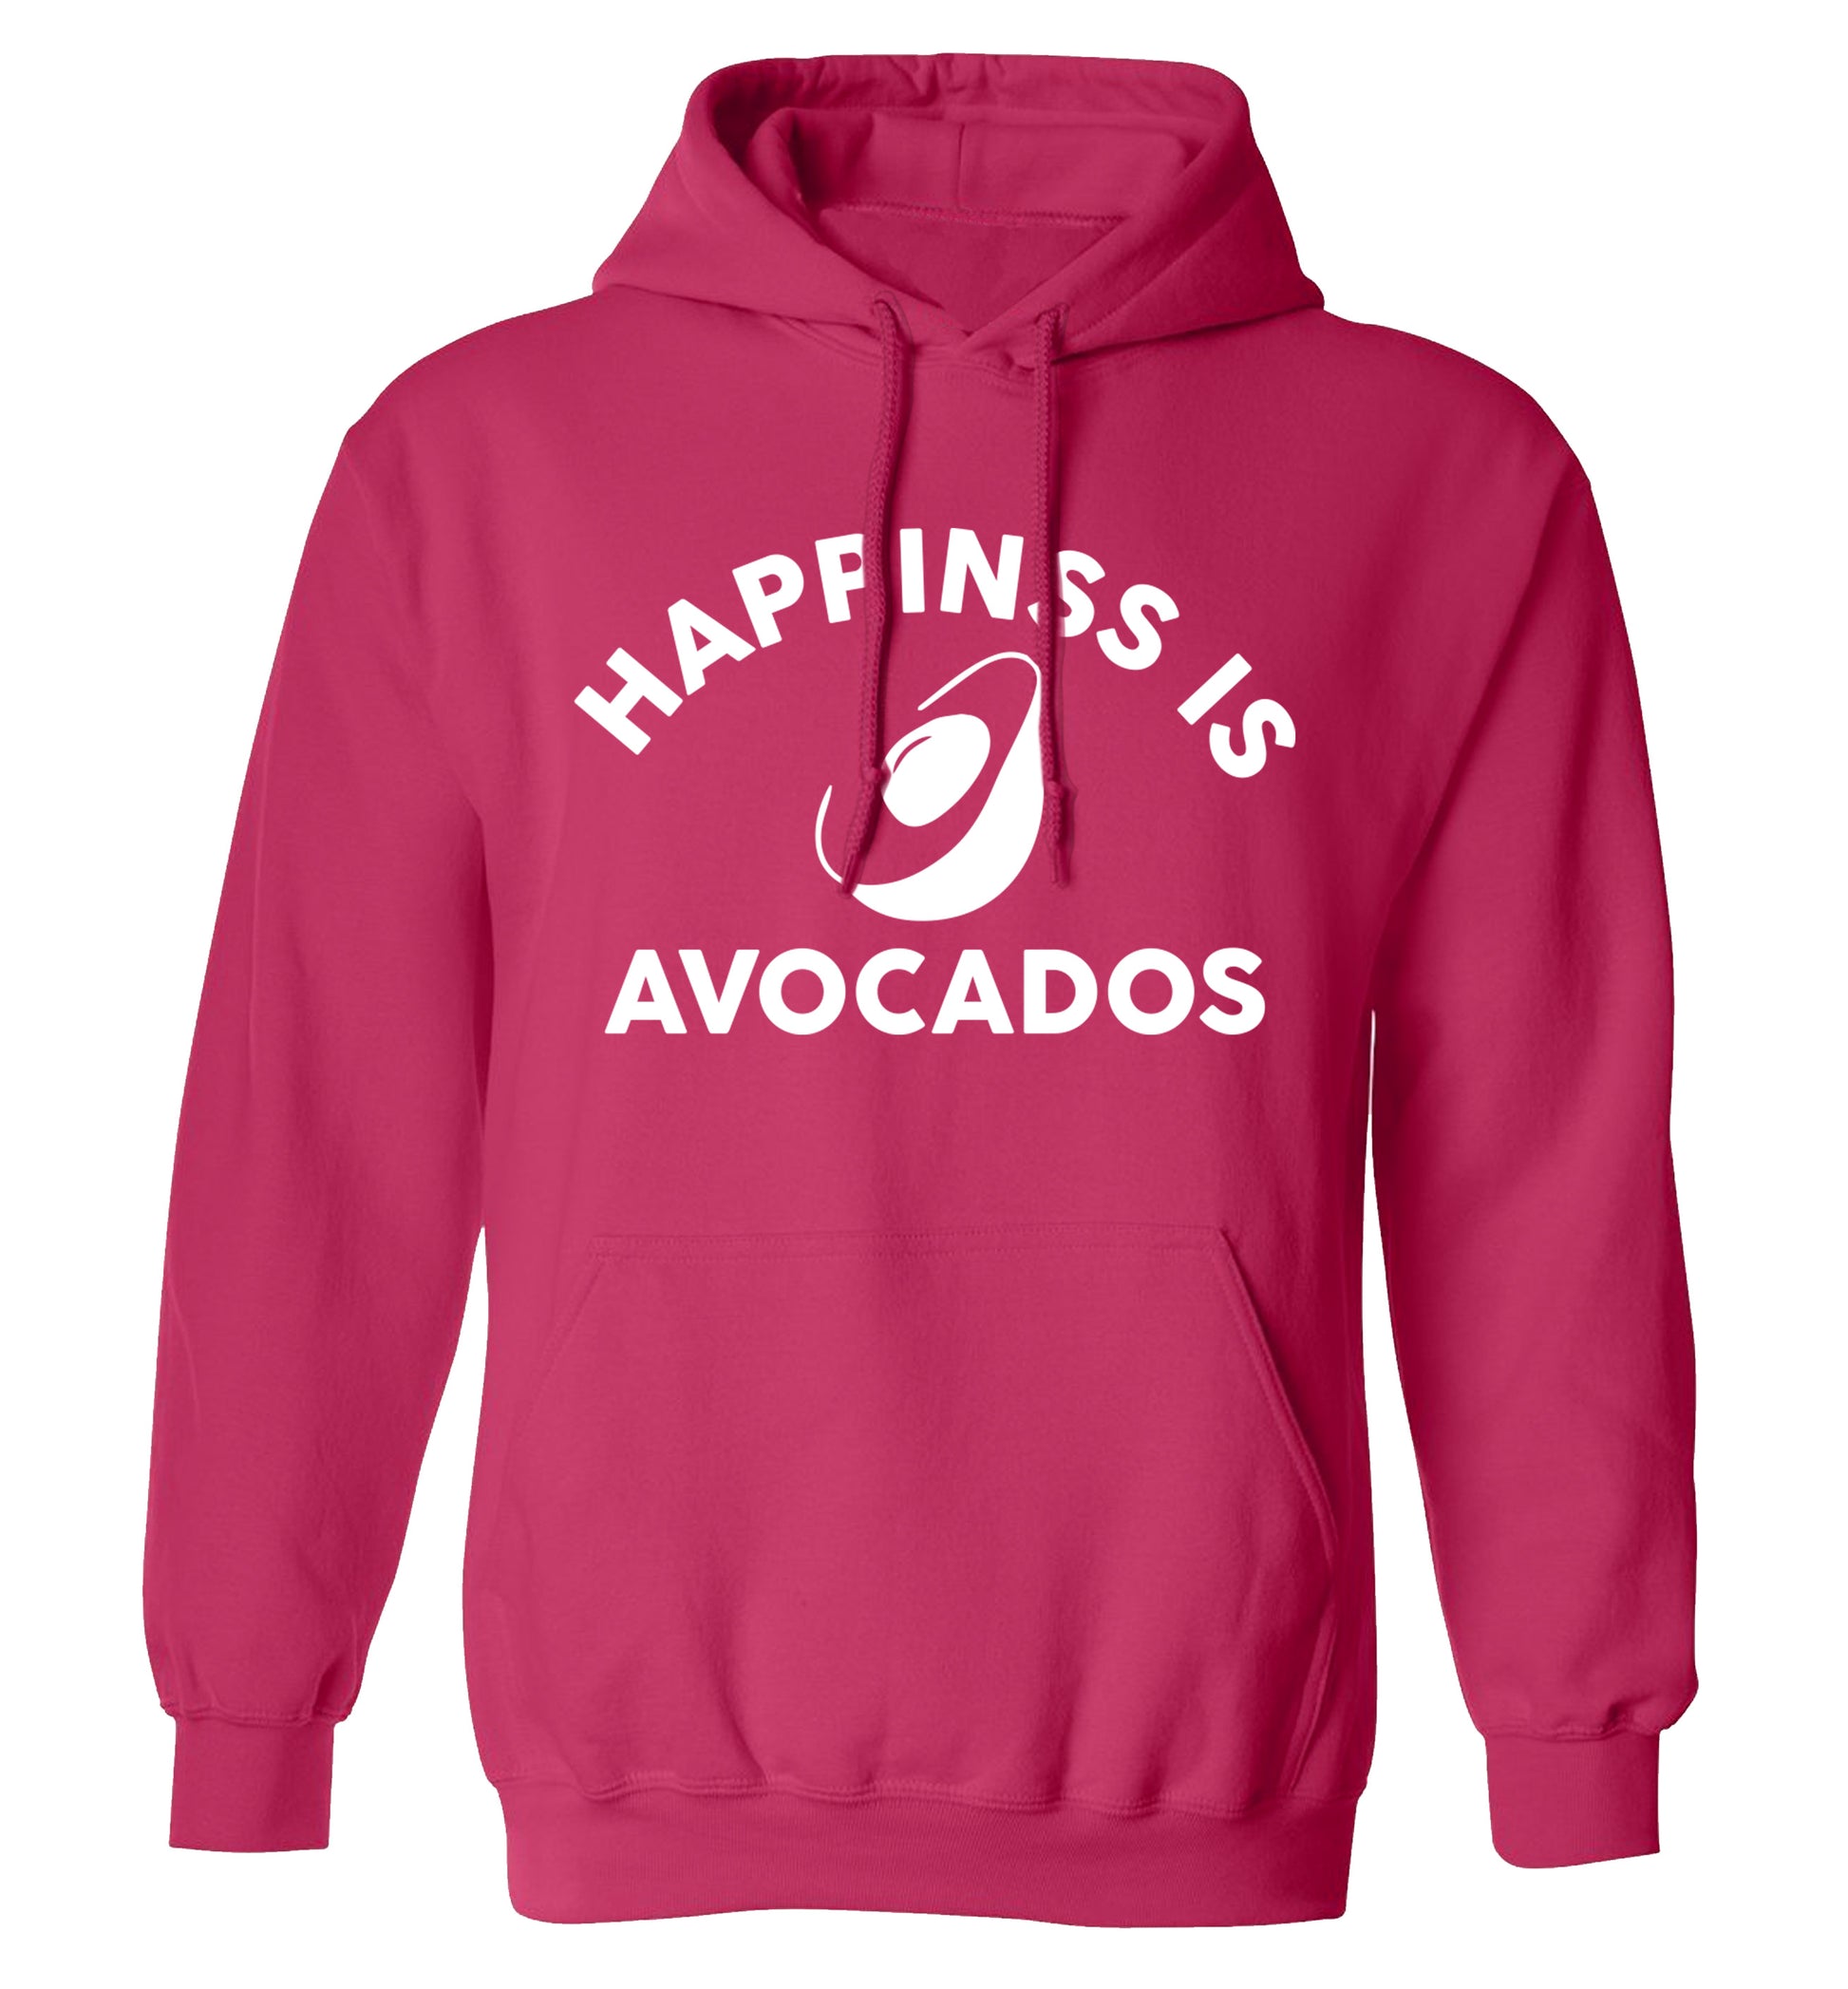 Happiness is avocados adults unisex pink hoodie 2XL